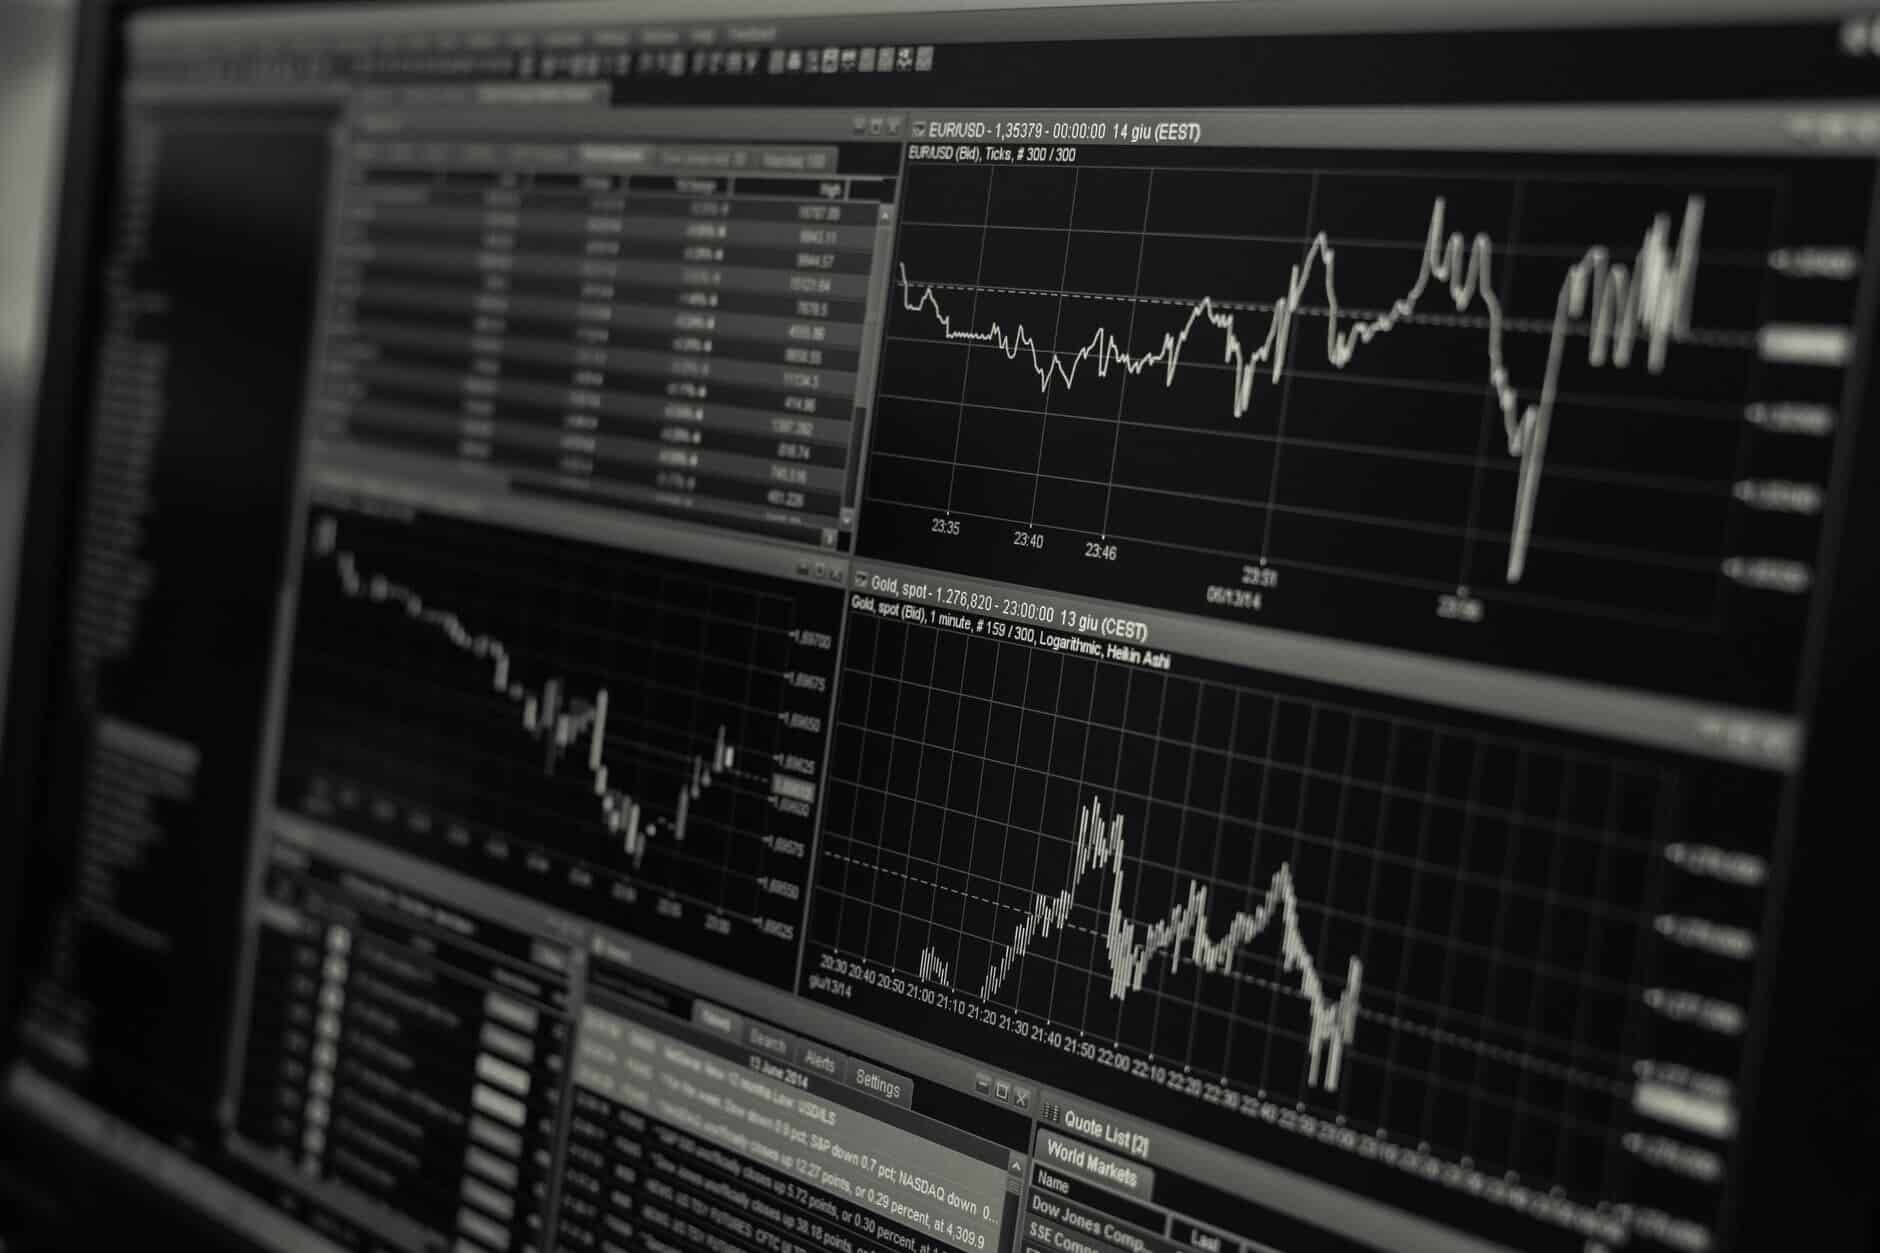 A black and white image of a computer screen showing stock charts.